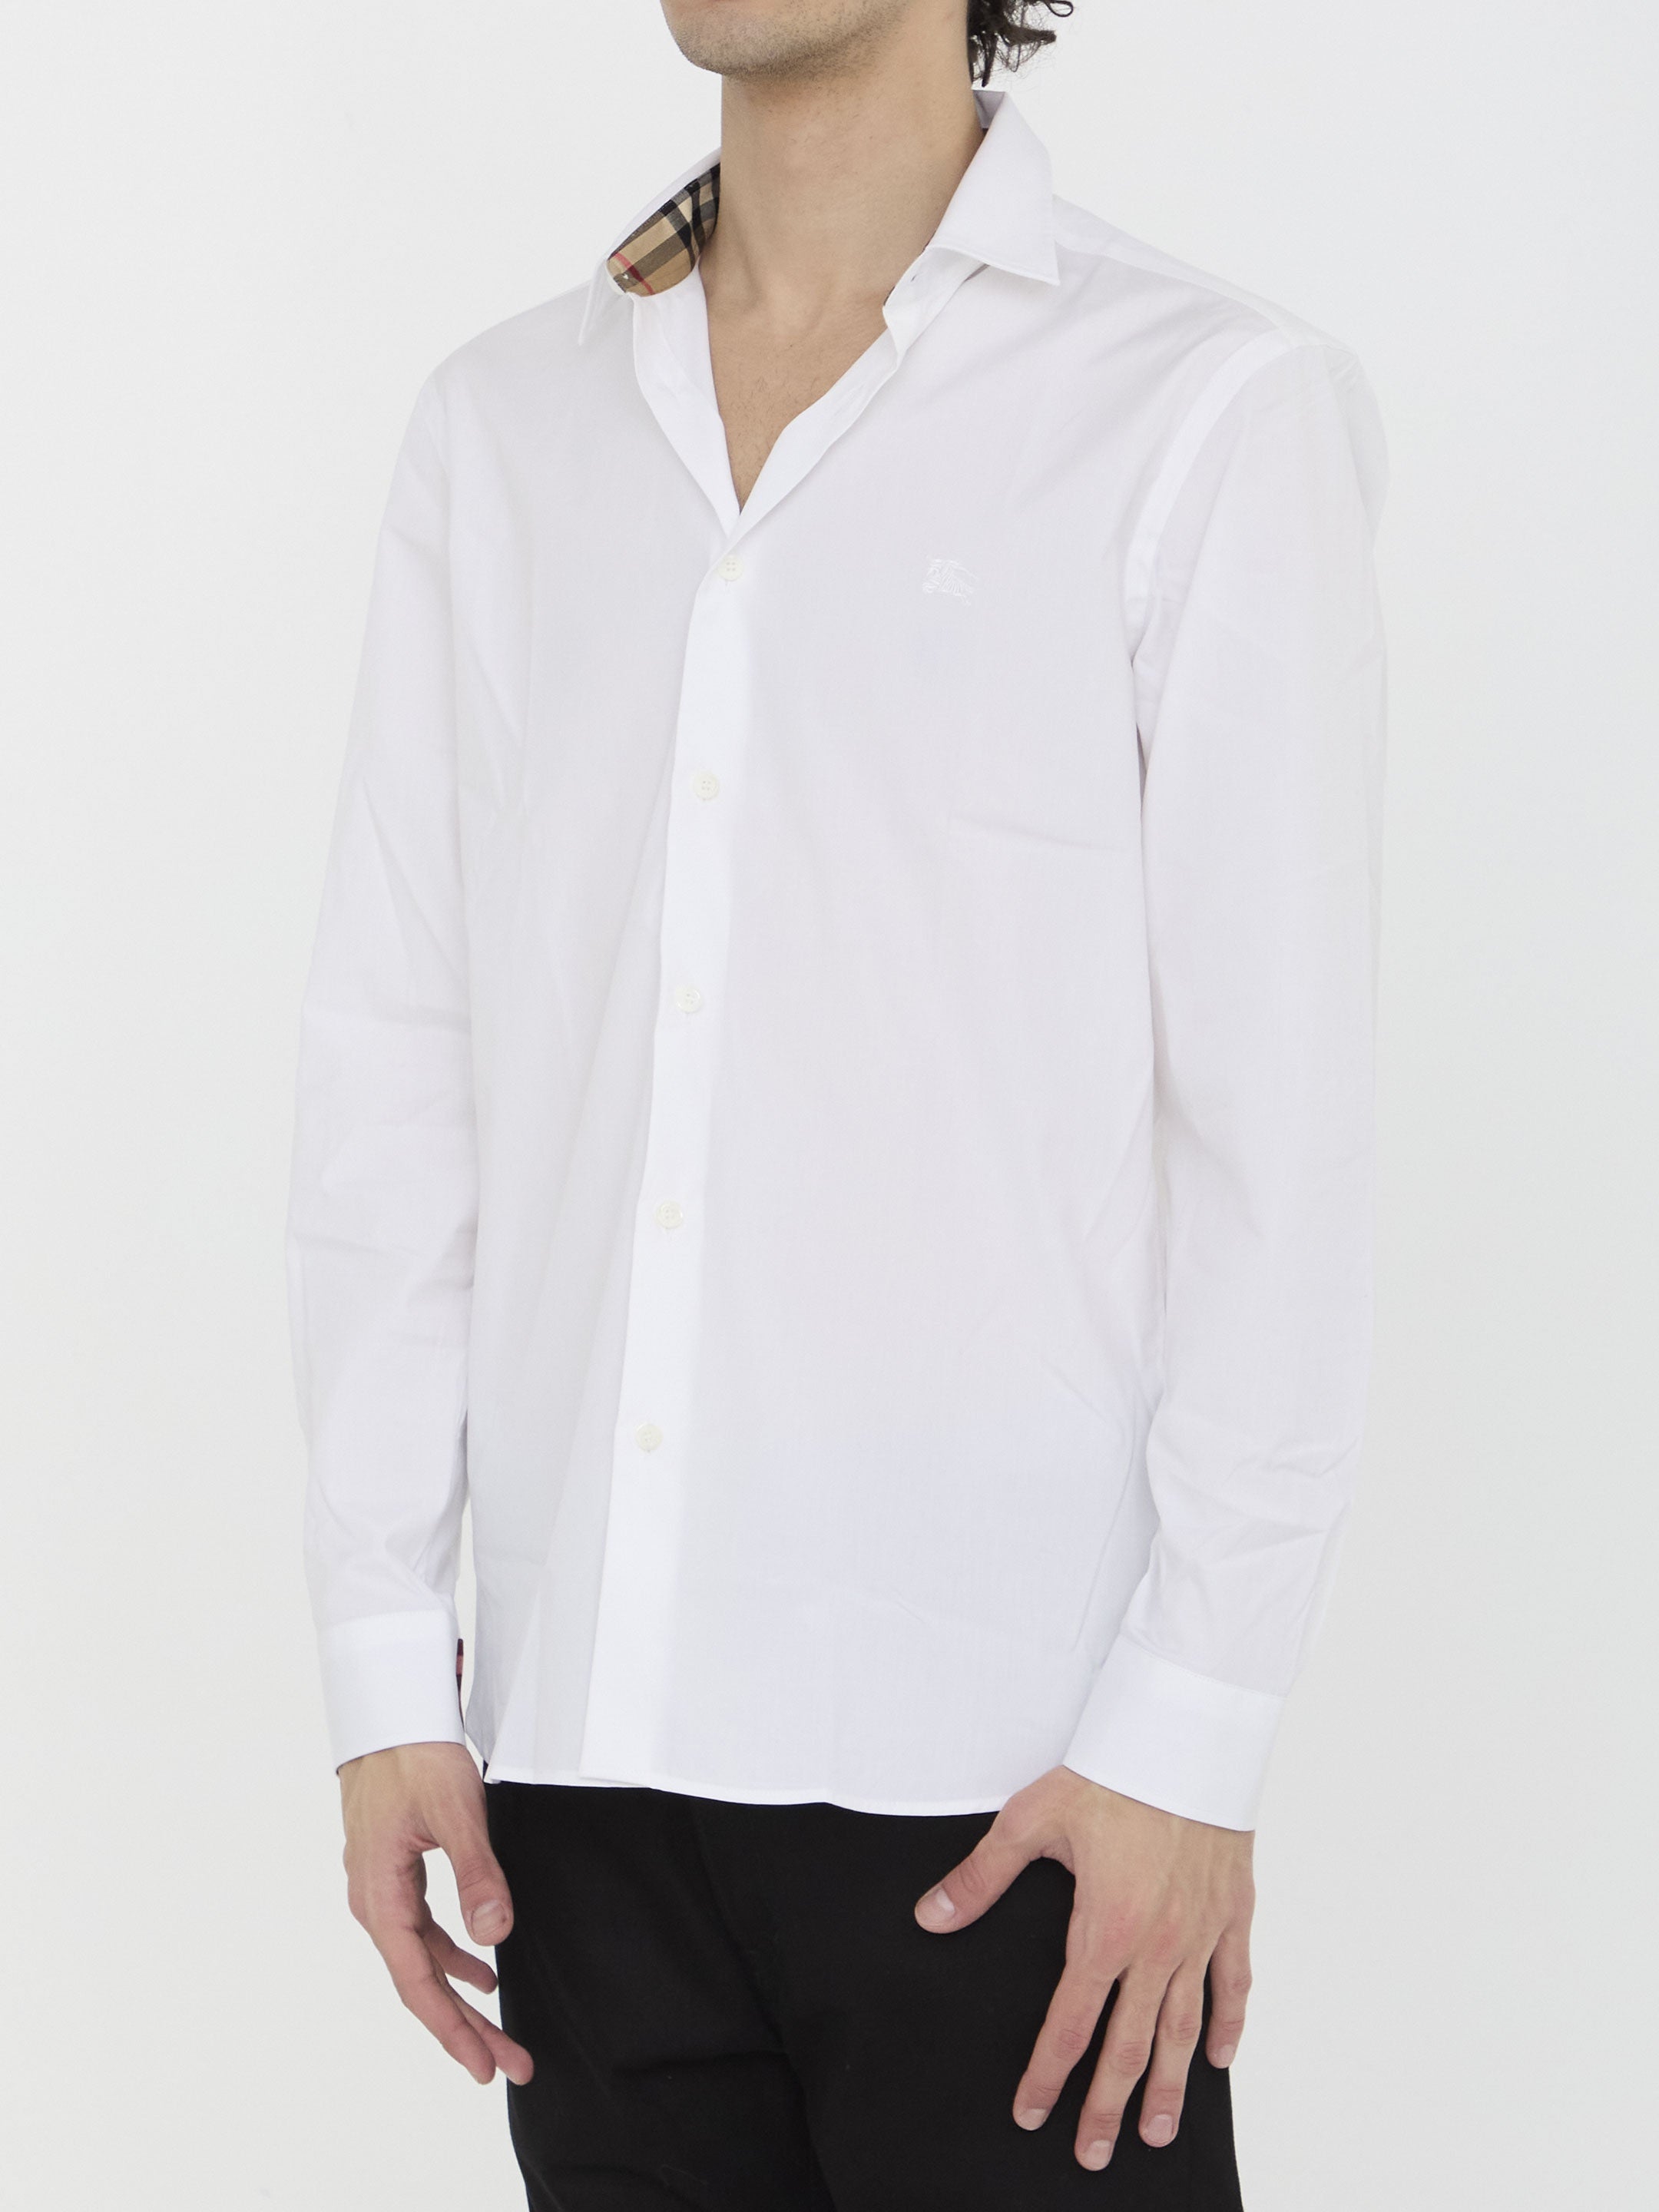 BURBERRY-OUTLET-SALE-Stretch-cotton-shirt-Shirts-M-WHITE-ARCHIVE-COLLECTION-2.jpg